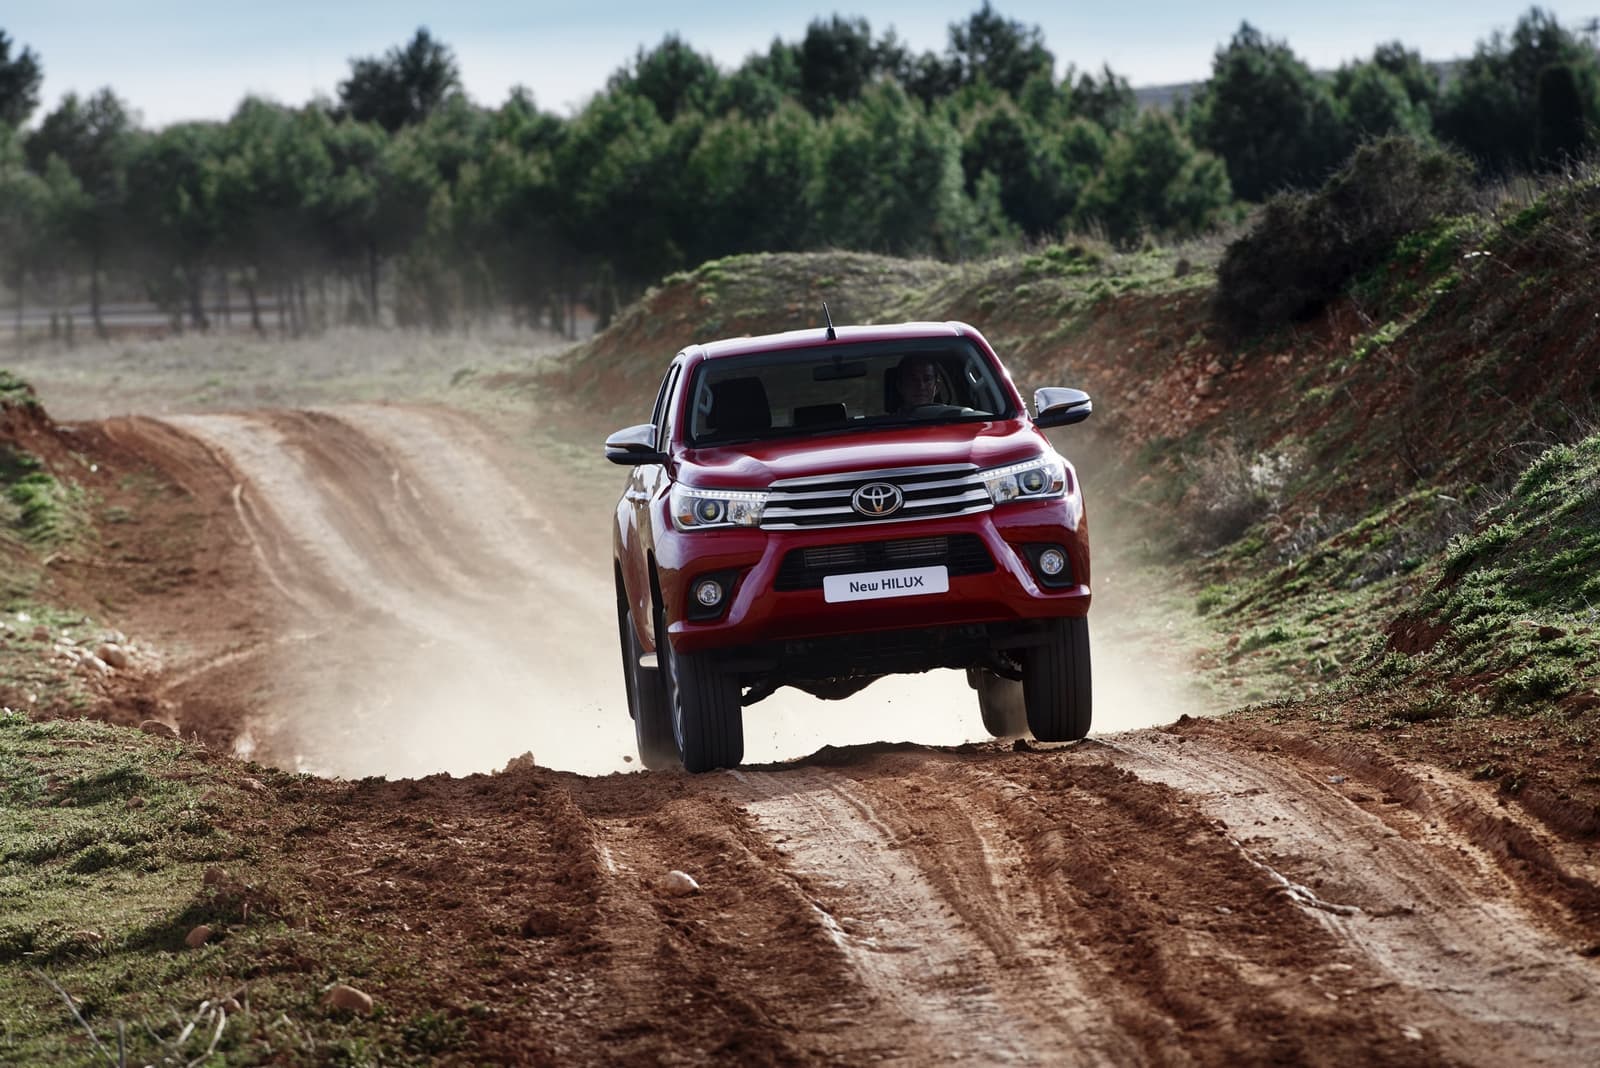 Toyota Hilux 2016 wallpaper HD High Quality Download